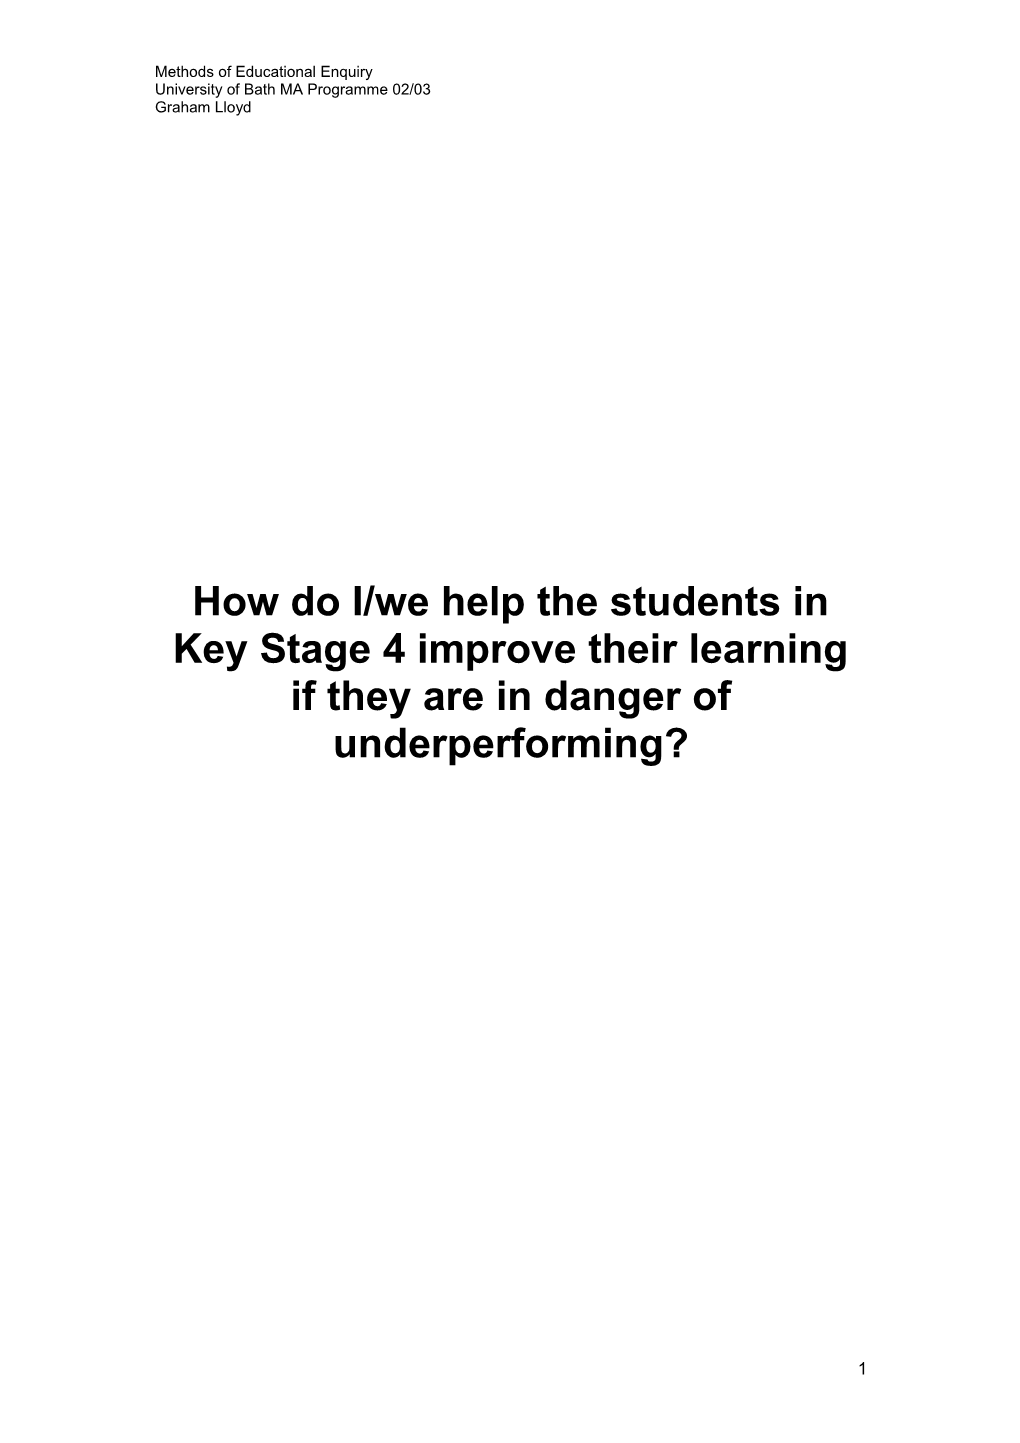 How Do I/We Help the Students in Key Stage 4 Improve Their Learning If They Are in Danger